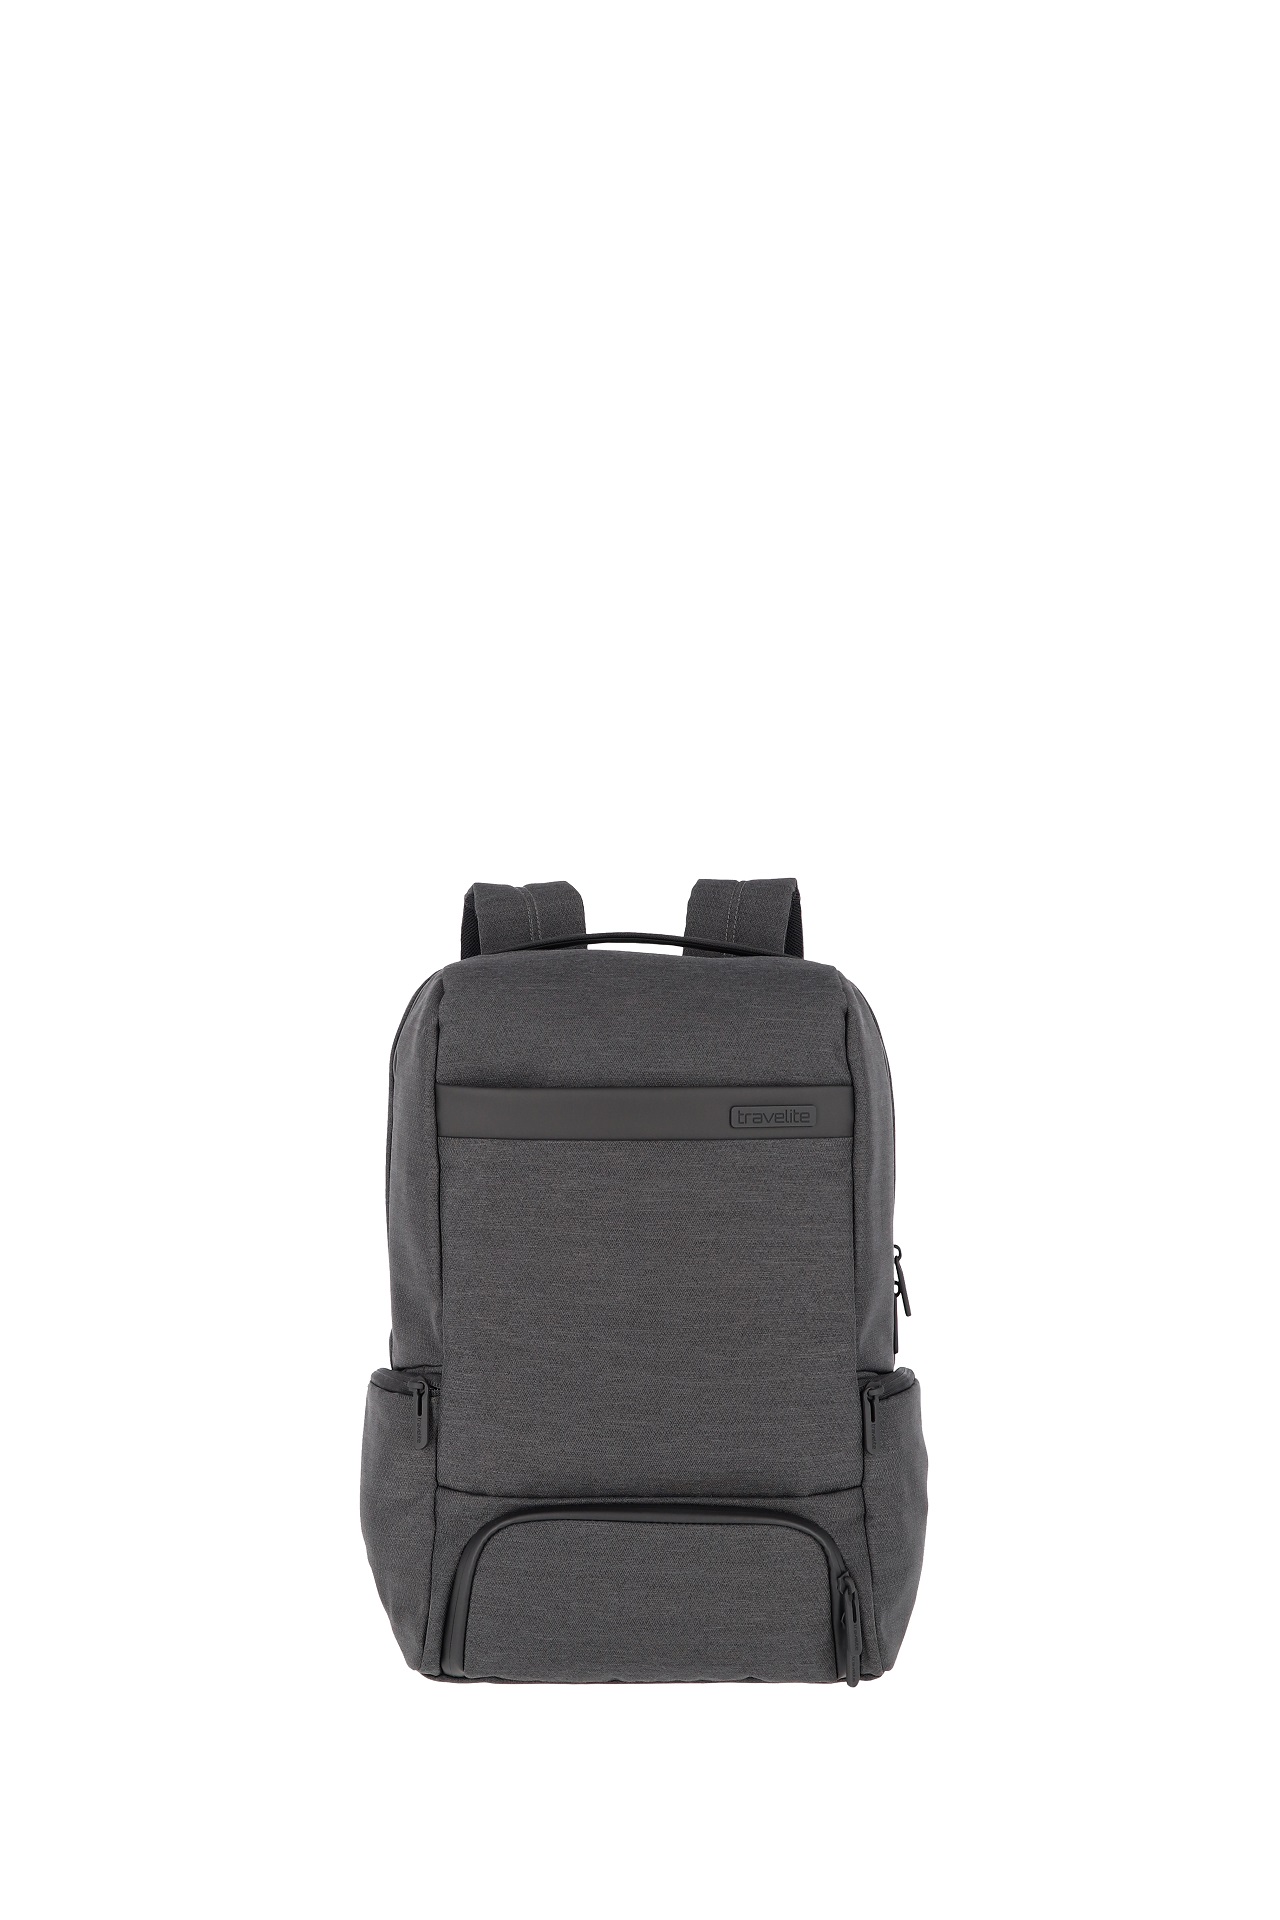 E-shop Travelite Meet Backpack Anthracite